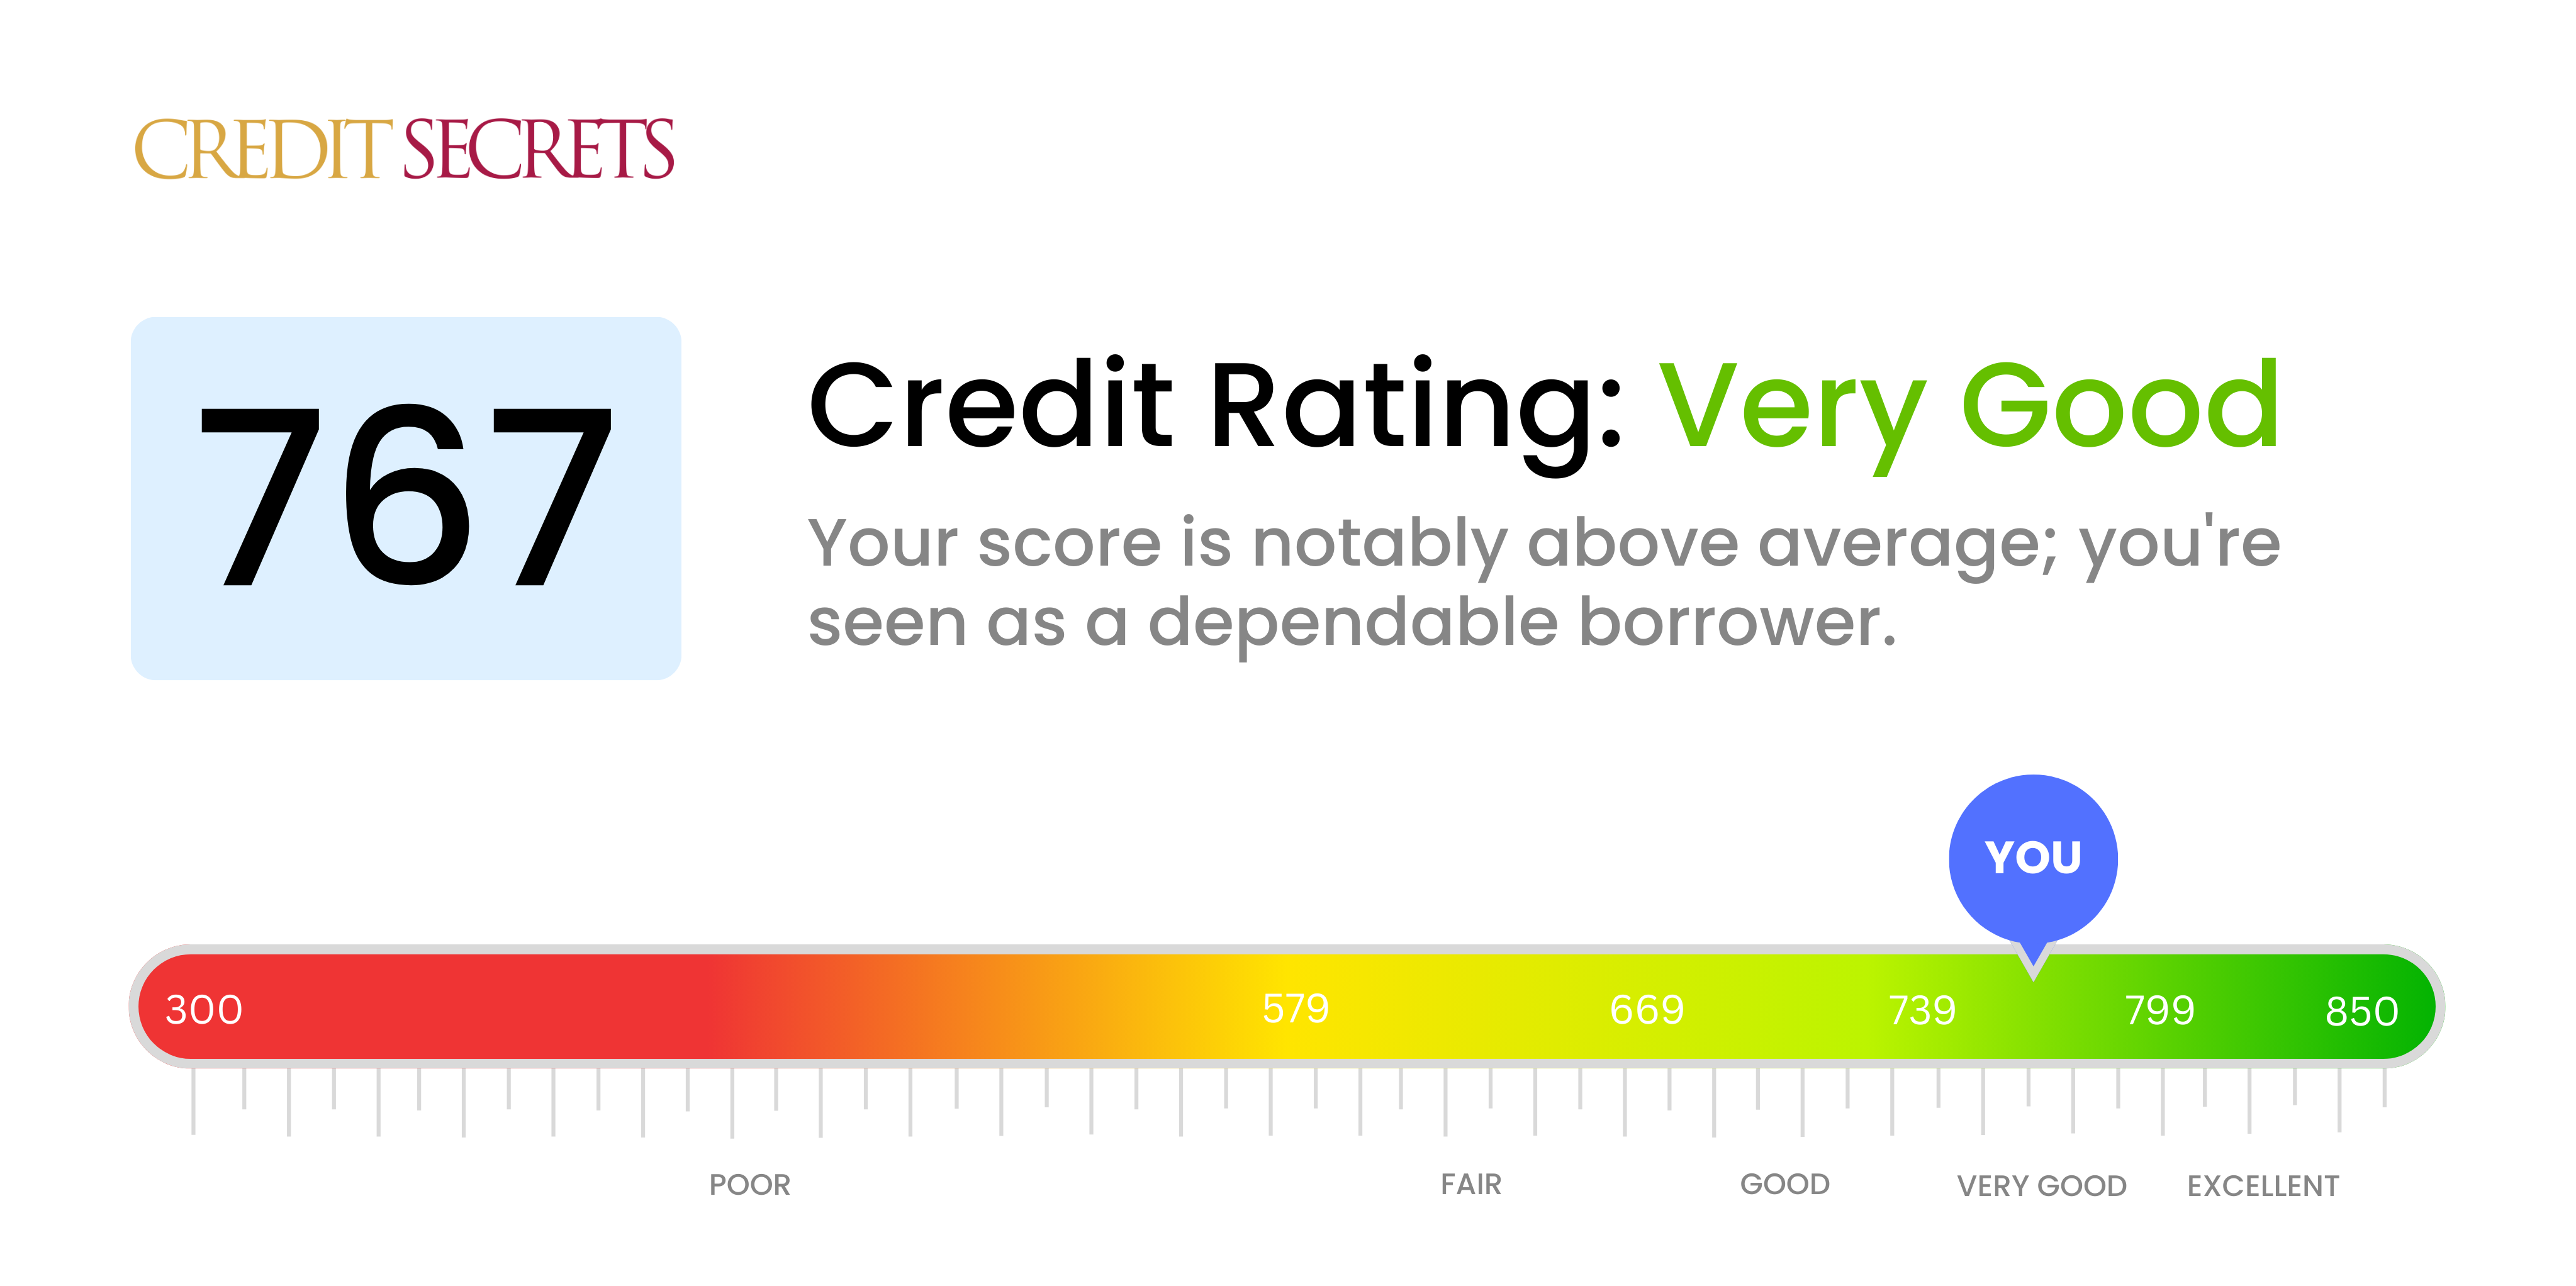 Is 767 a good credit score?